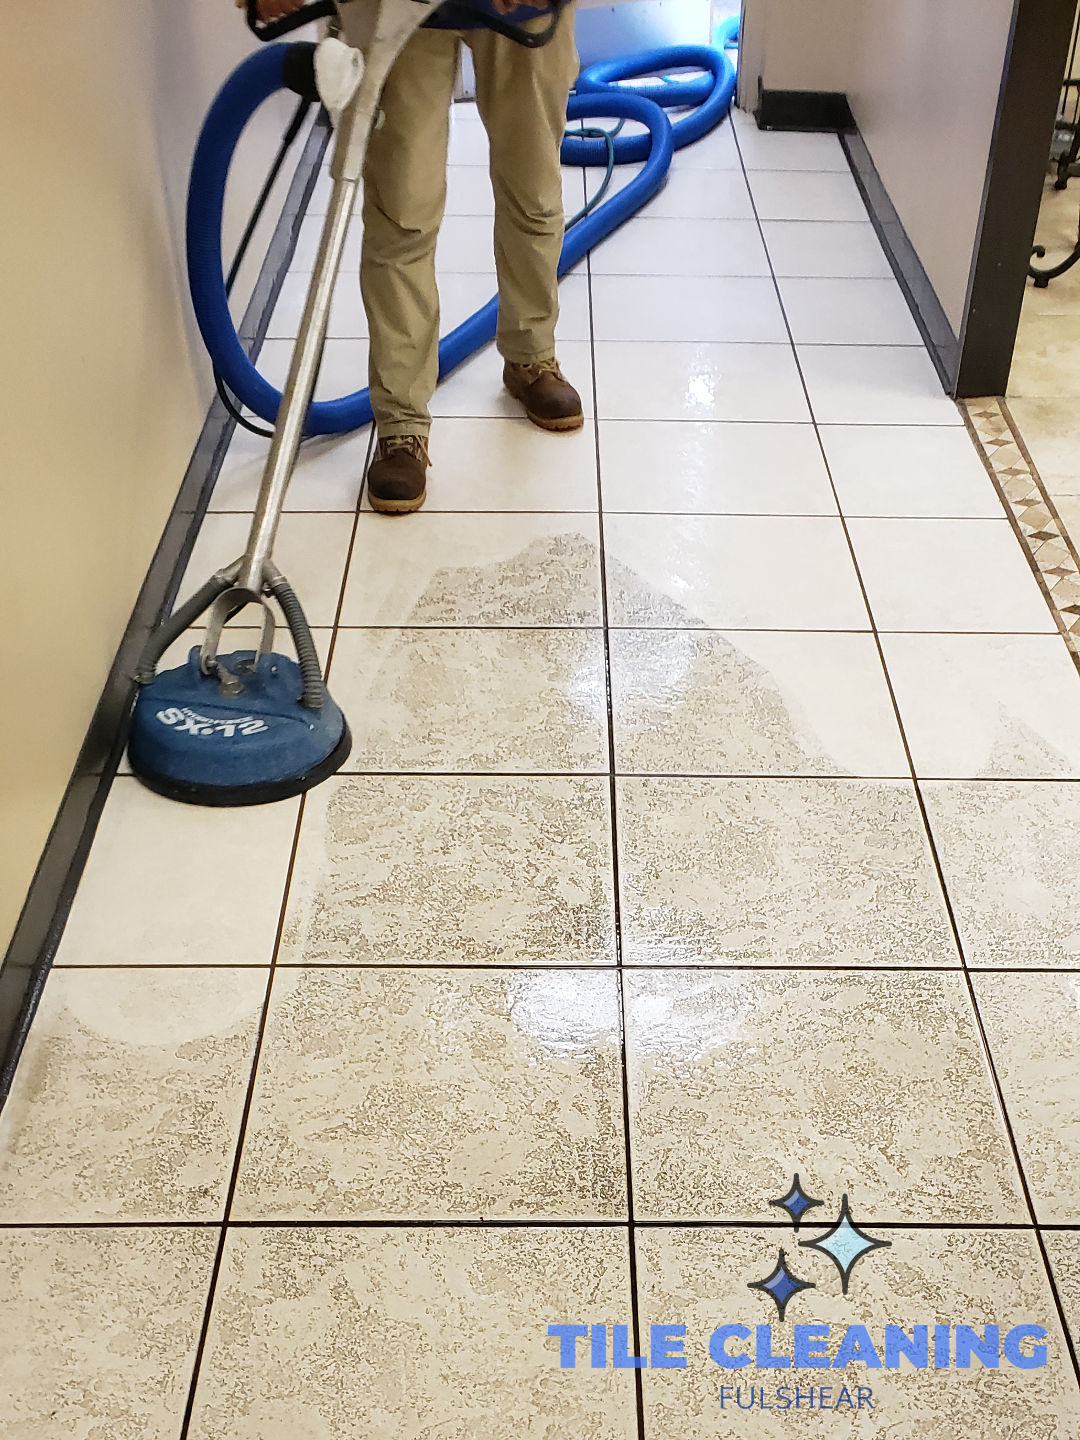 http://fulsheartilecleaning.com/wp-content/uploads/2021/02/tile-grout-cleaning-before-after-2-1.jpg